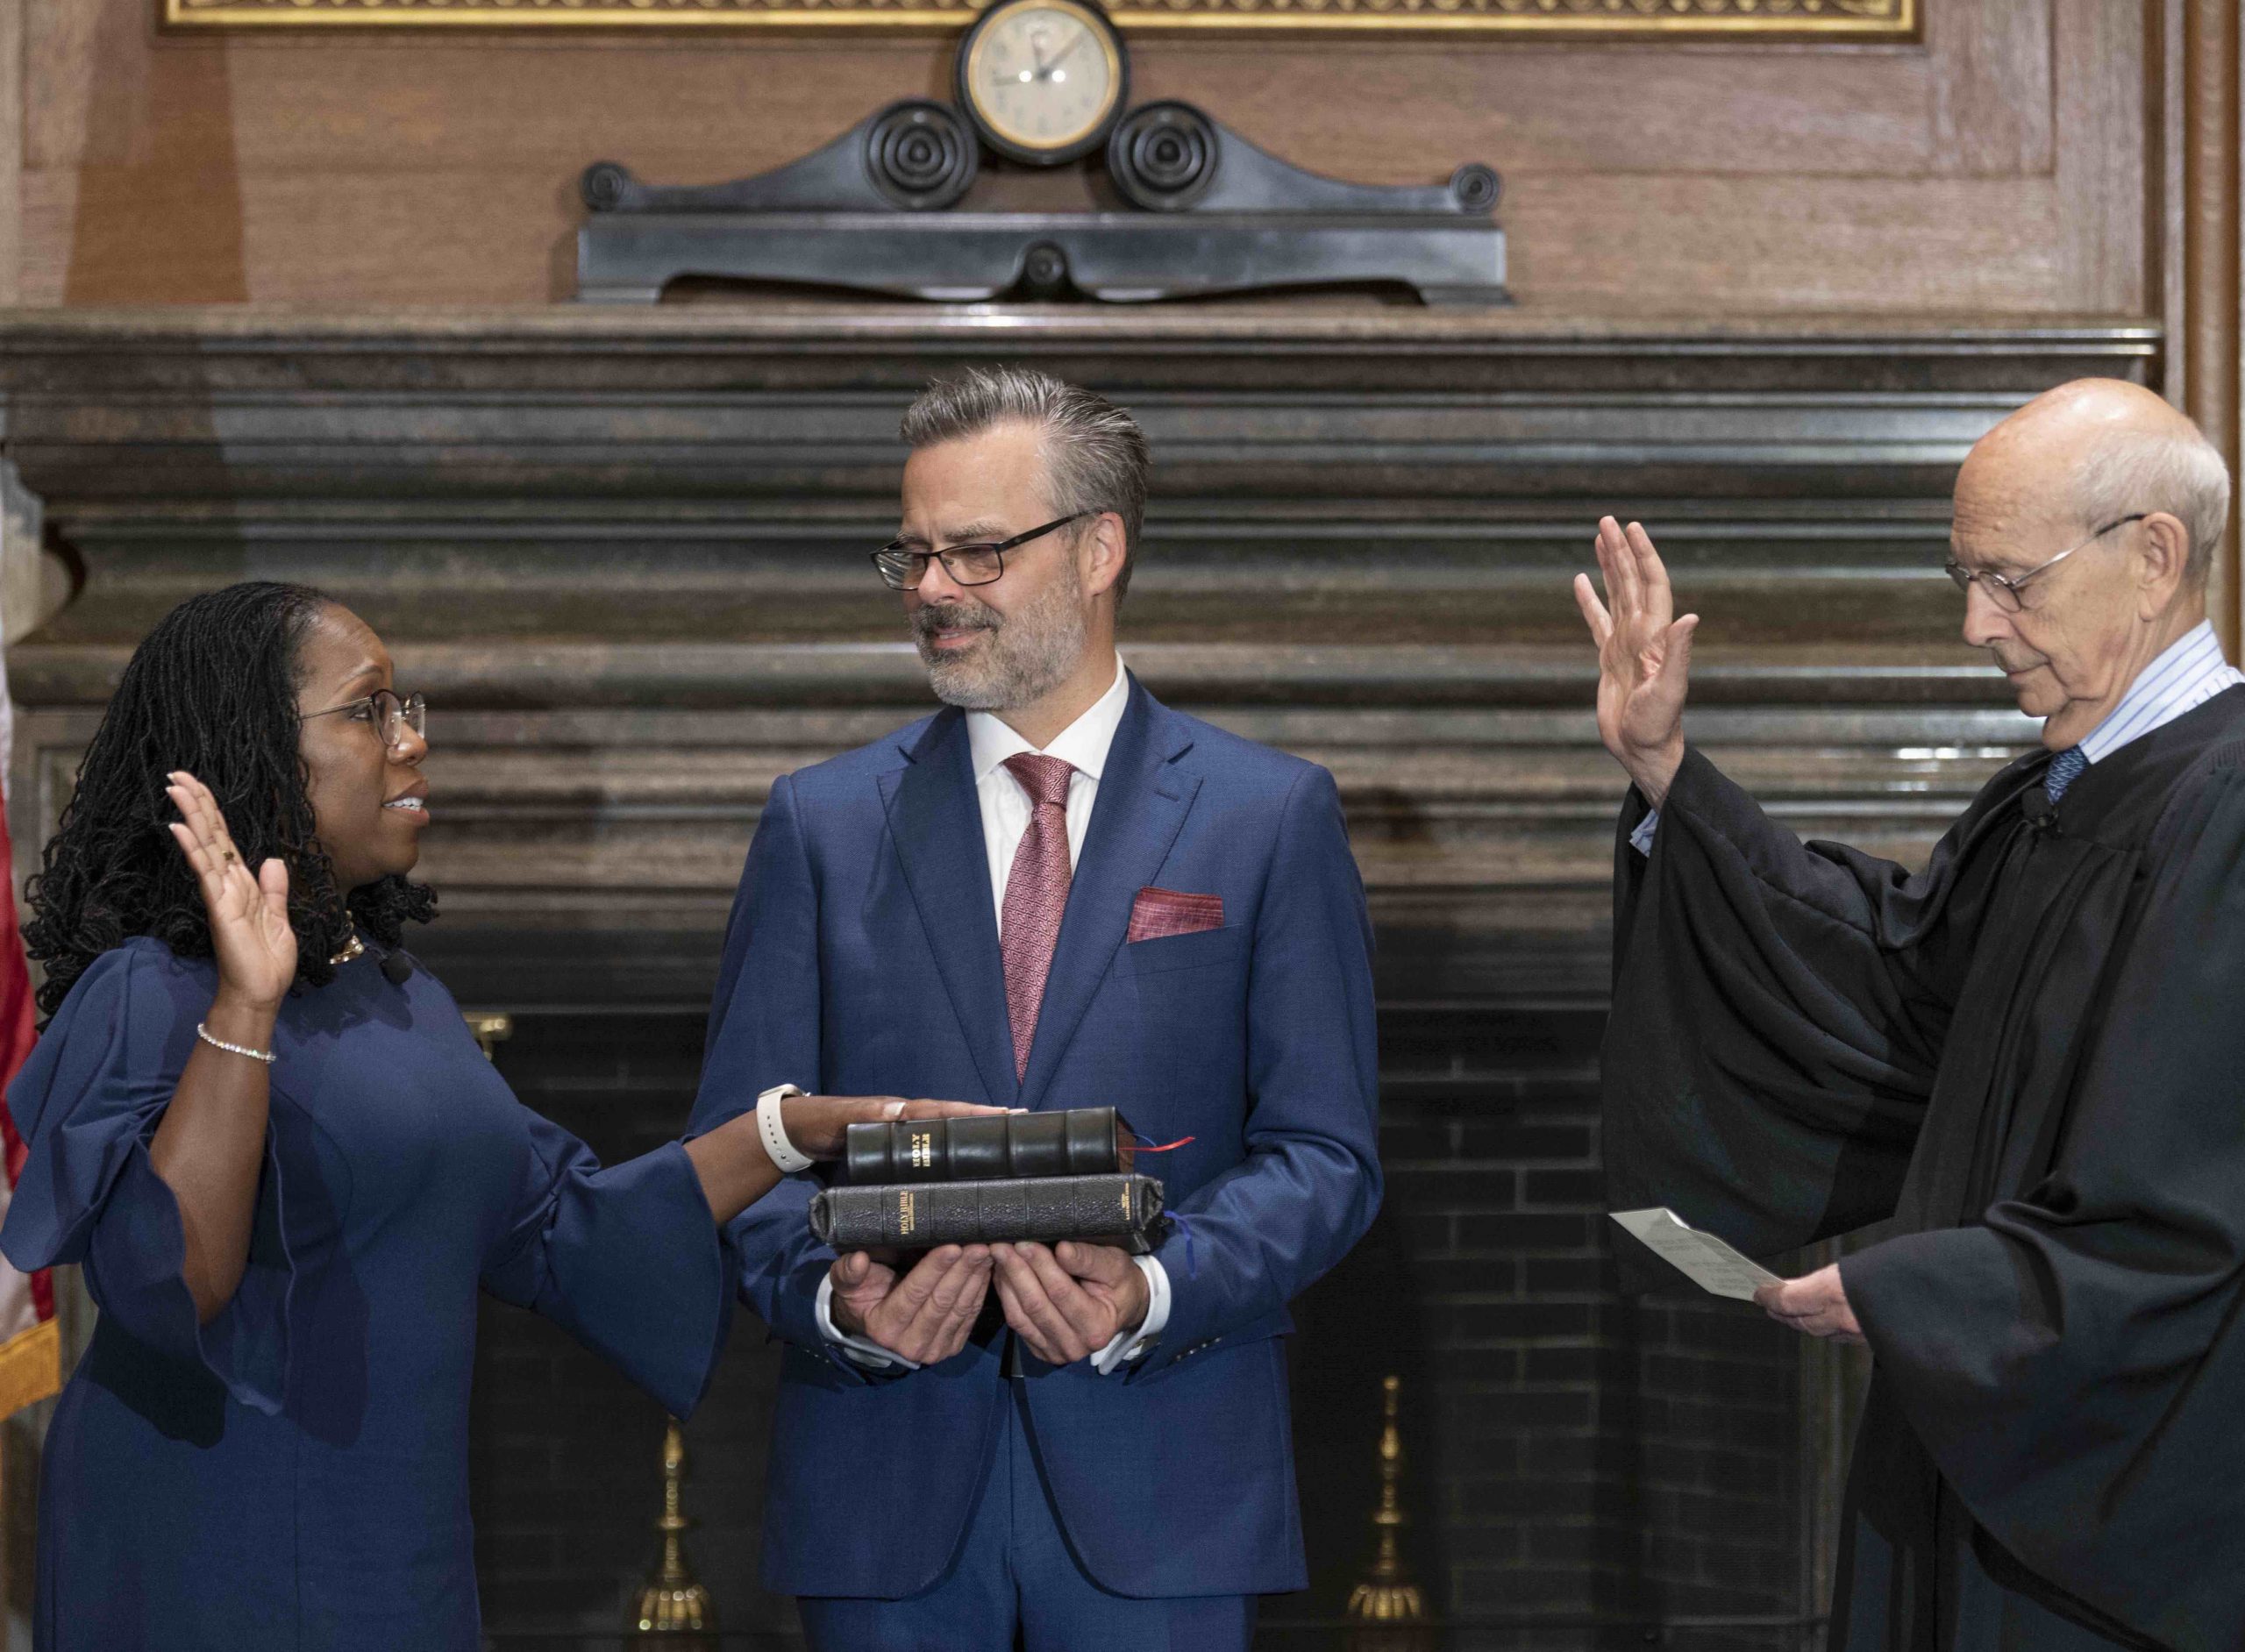 Justice Ketanji Brown Jackson takes the judicial oath from Justice Stephen Breyer